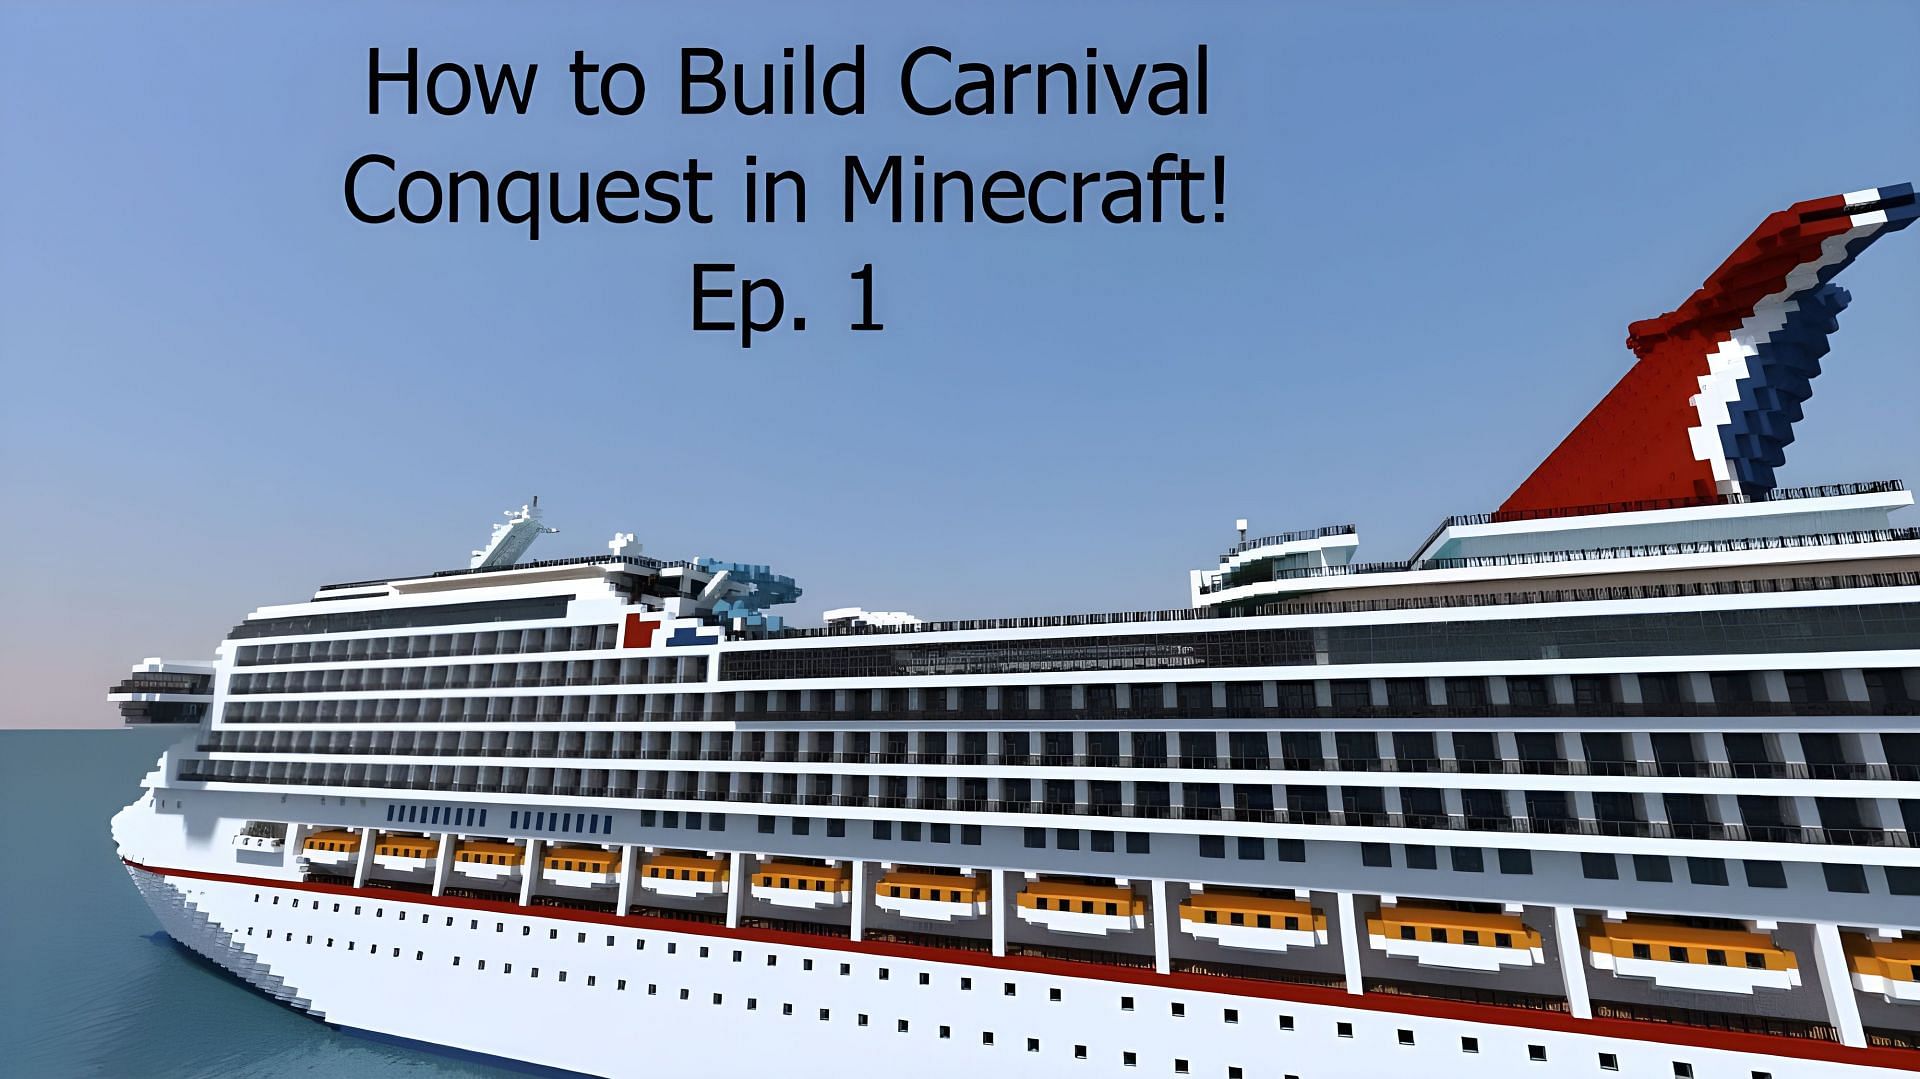 The Carnival Conquest Cruise Ship (Image via YouTube/ProdigyzMined)